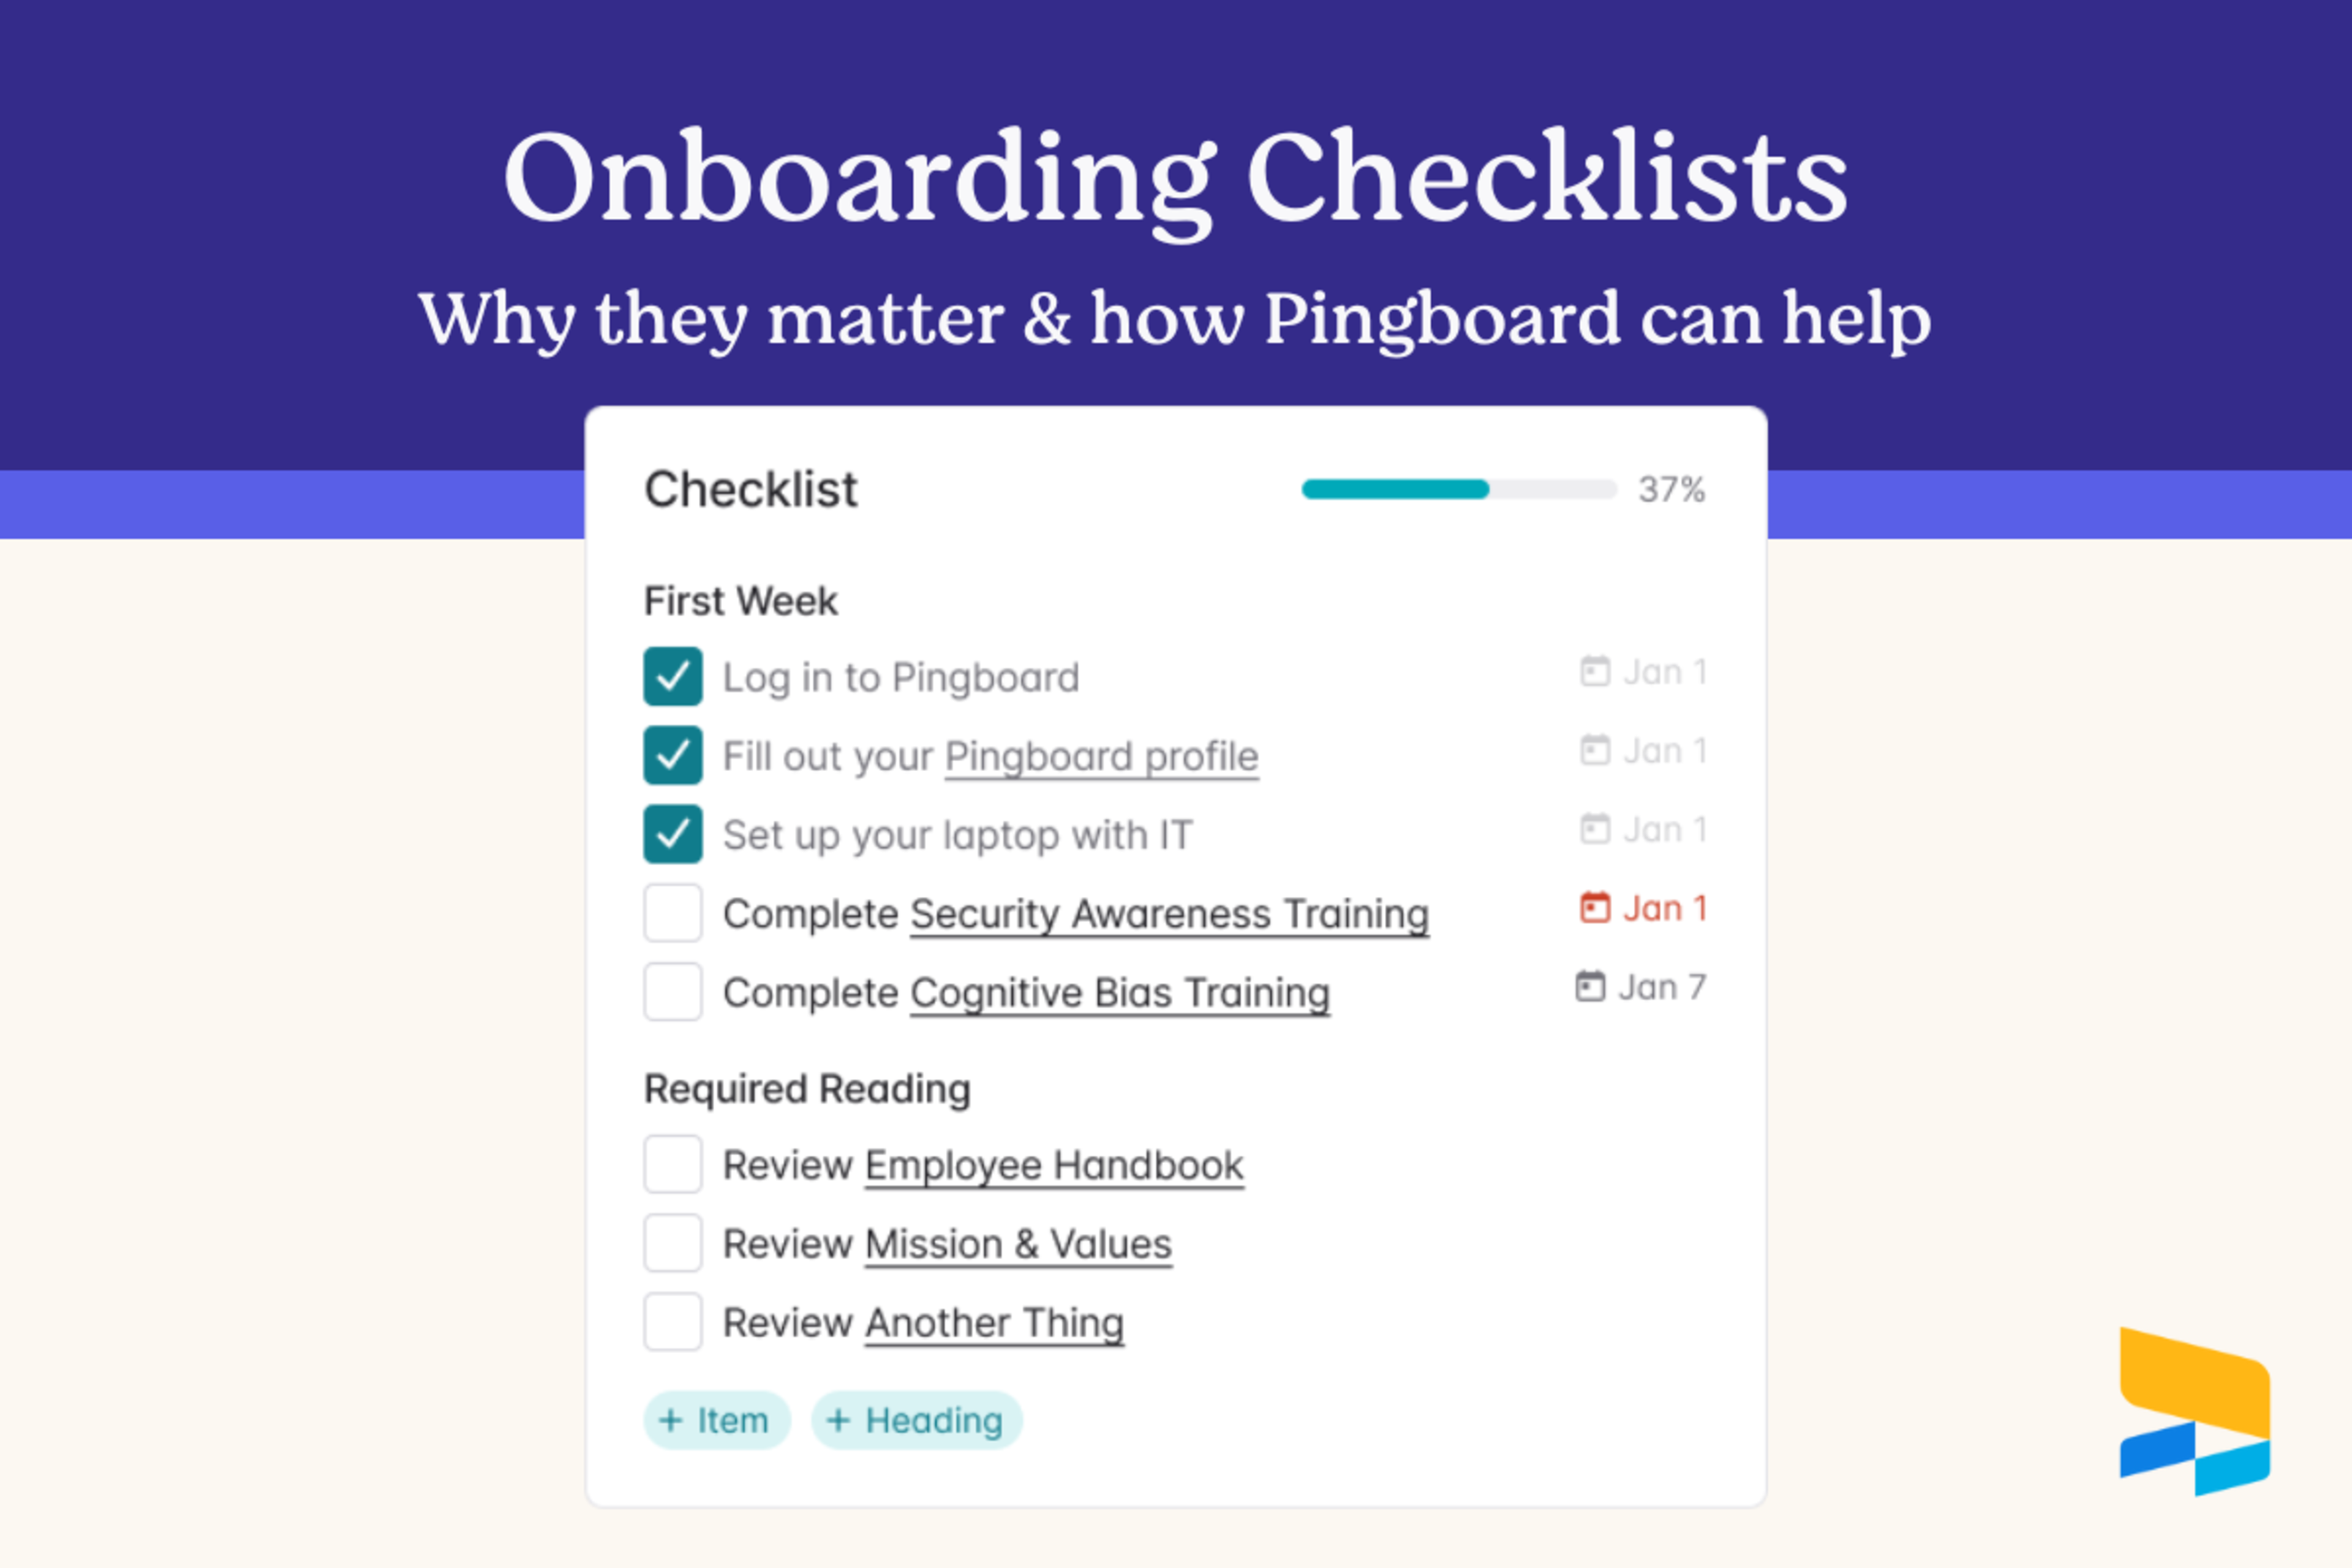 New Hire Onboarding Checklists